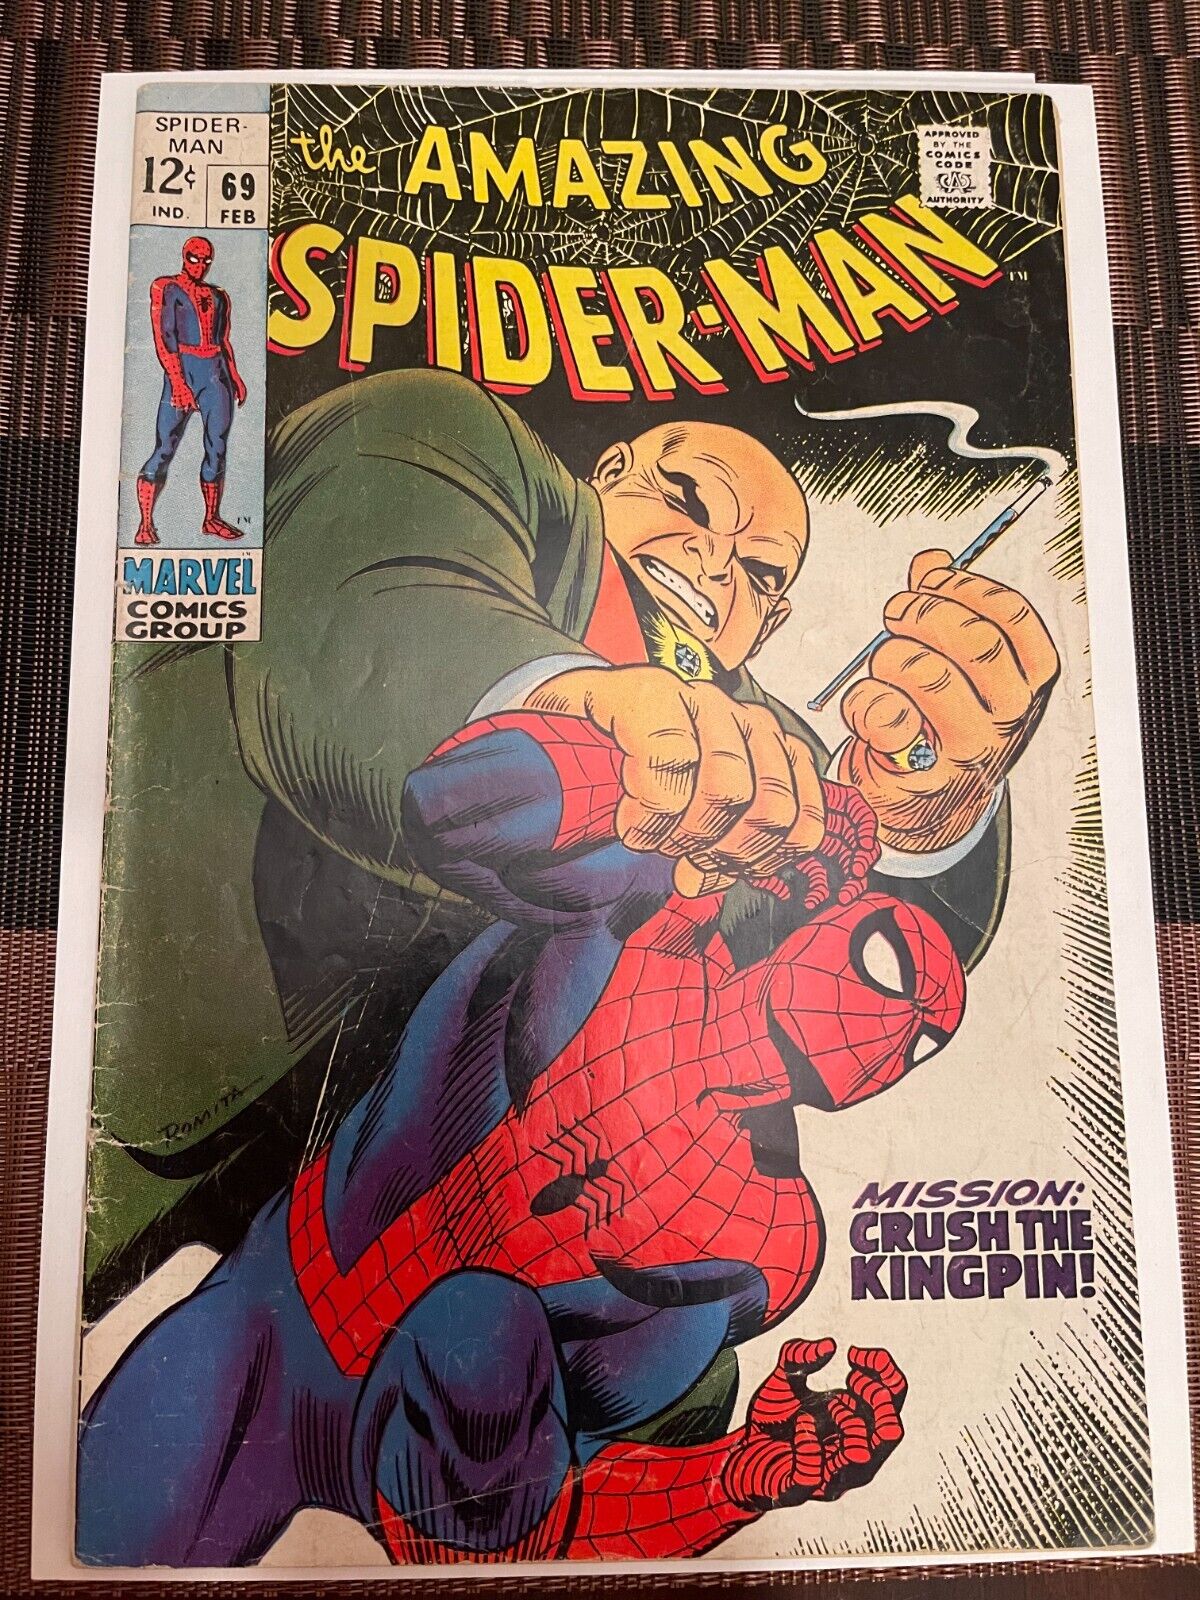 AMAZING SPIDER-MAN #69 - Kingpin Cover (1970)